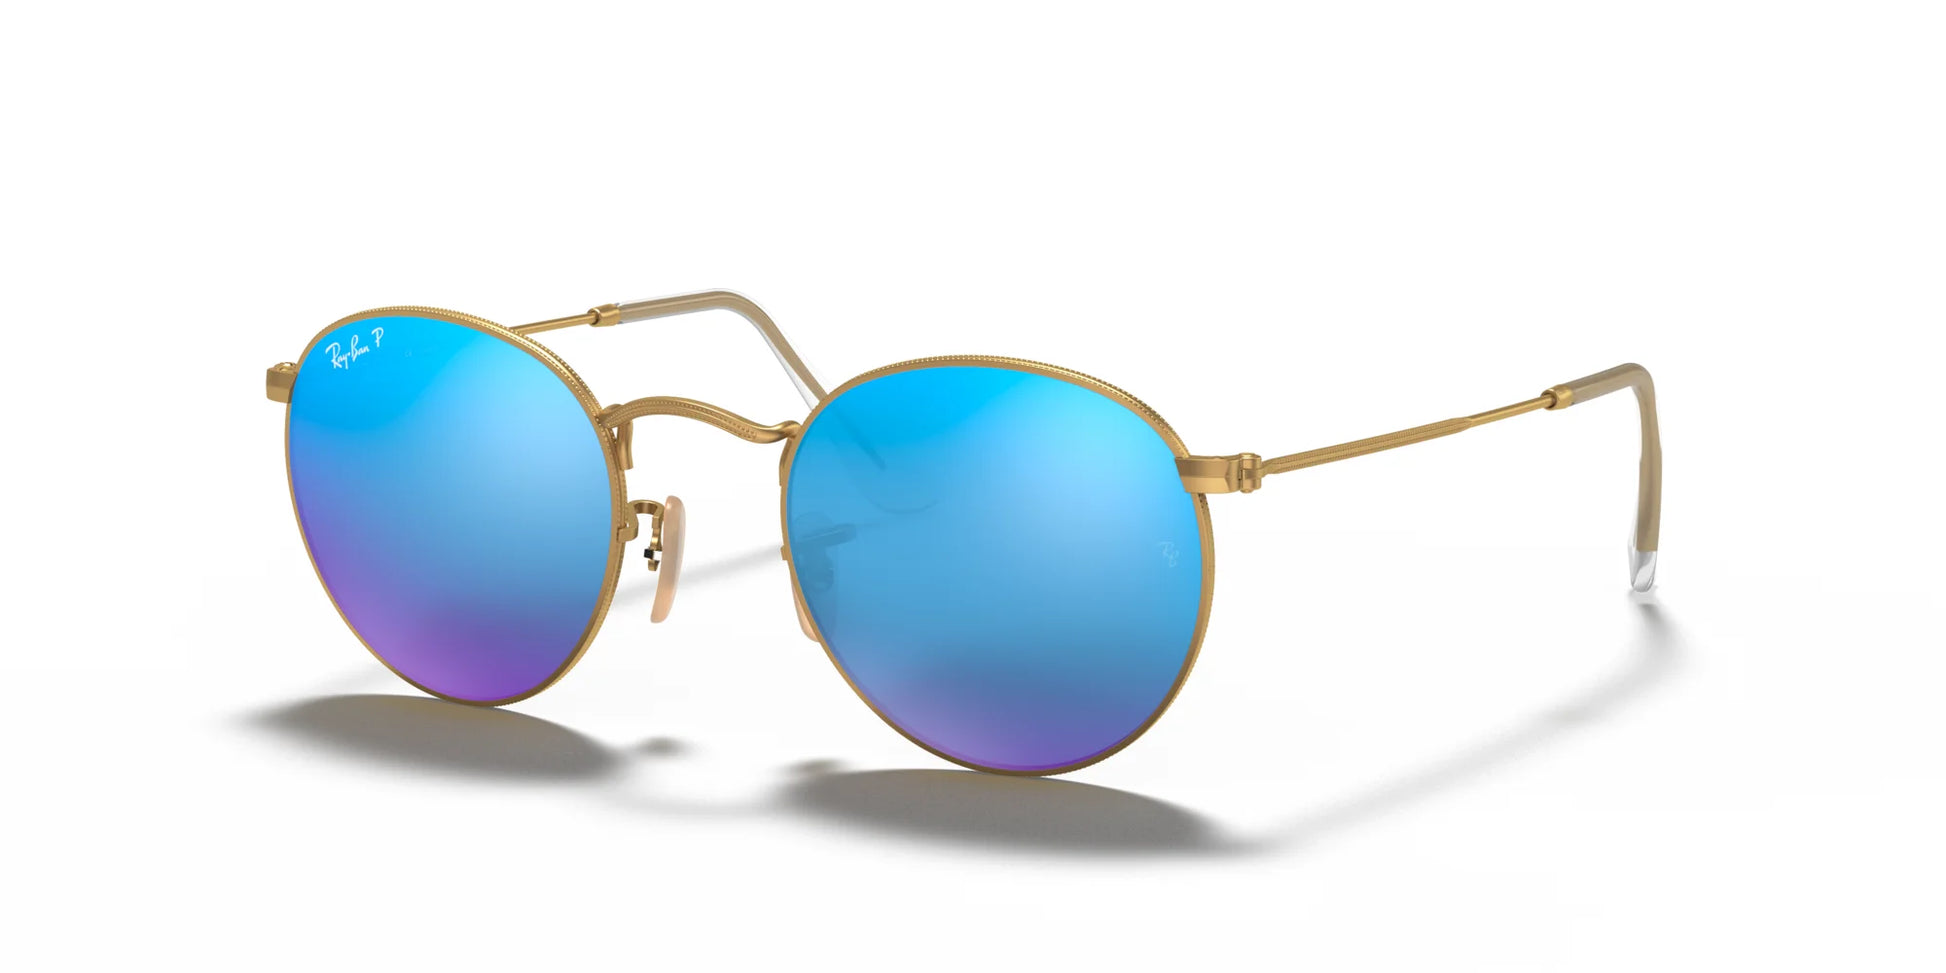 Ray-Ban ROUND METAL RB3447 Sunglasses Gold / Blue